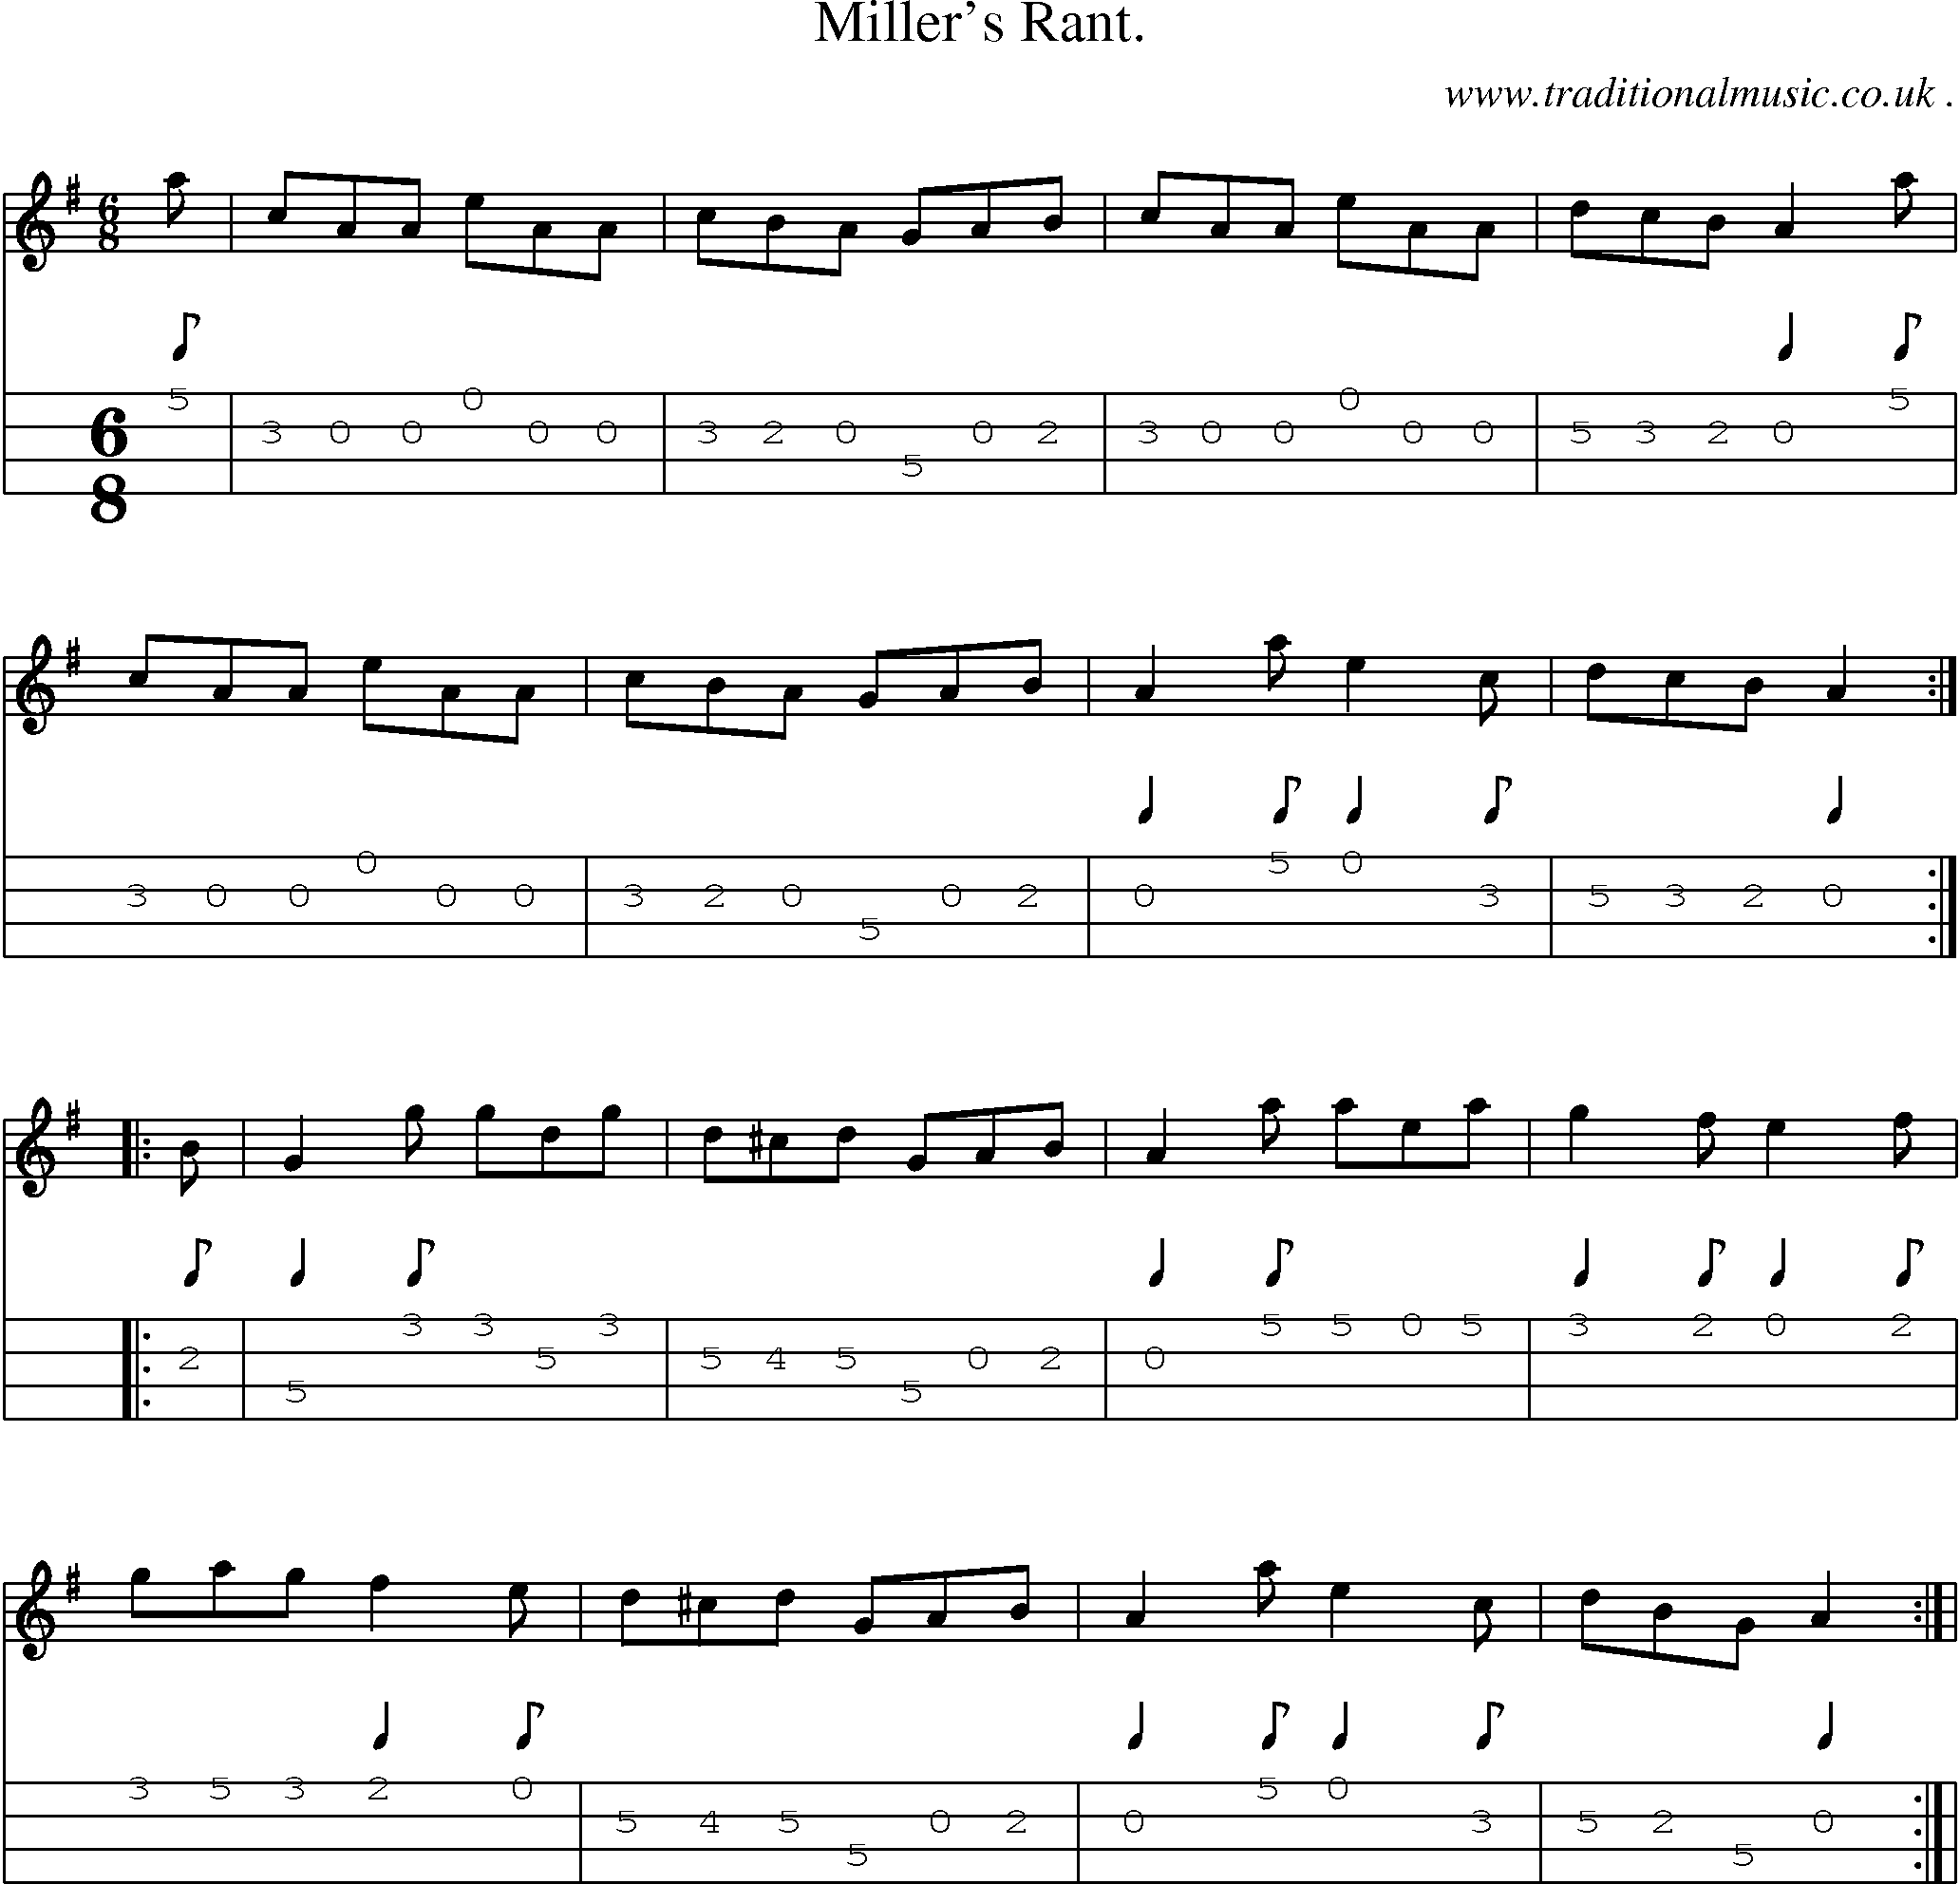 Sheet-Music and Mandolin Tabs for Millers Rant